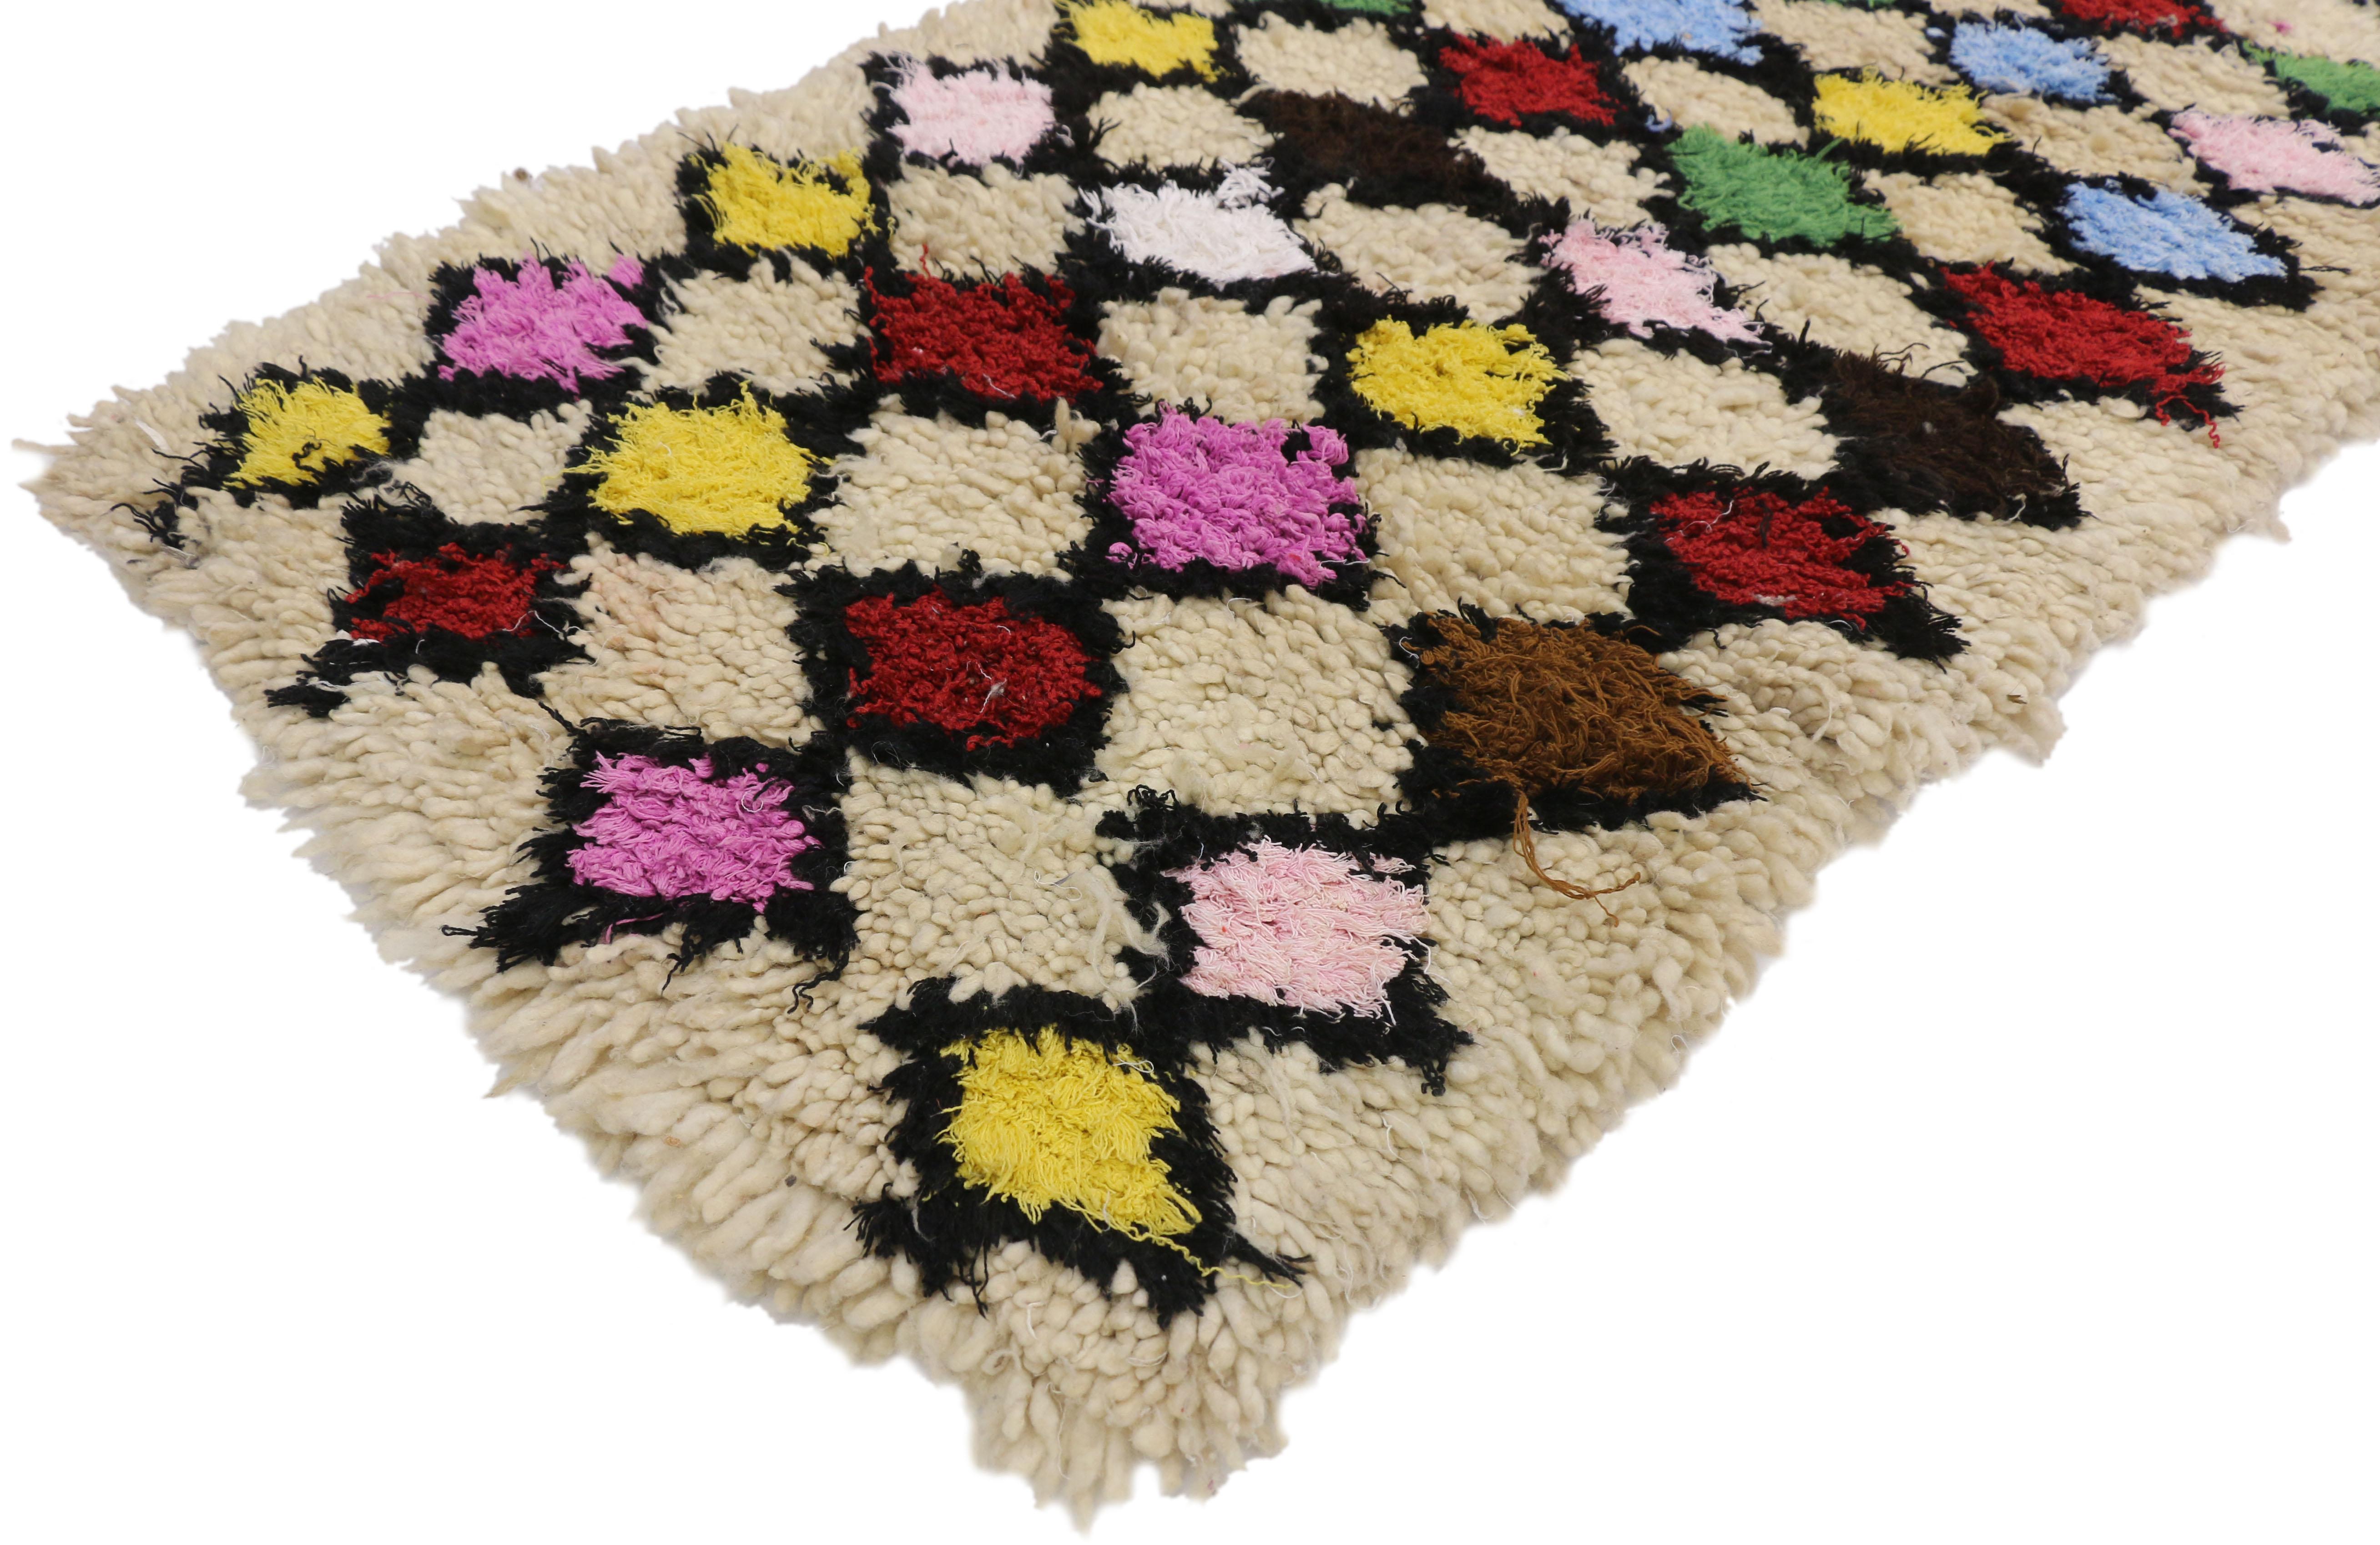 20837, vintage Moroccan Azilal rug, Berber colorful Boucherouite rug with tribal style. This vintage Moroccan Azilal rug features a column of five diamond lattices unfolding across the middle of an abrashed creamy-beige field. The zigzag outlines